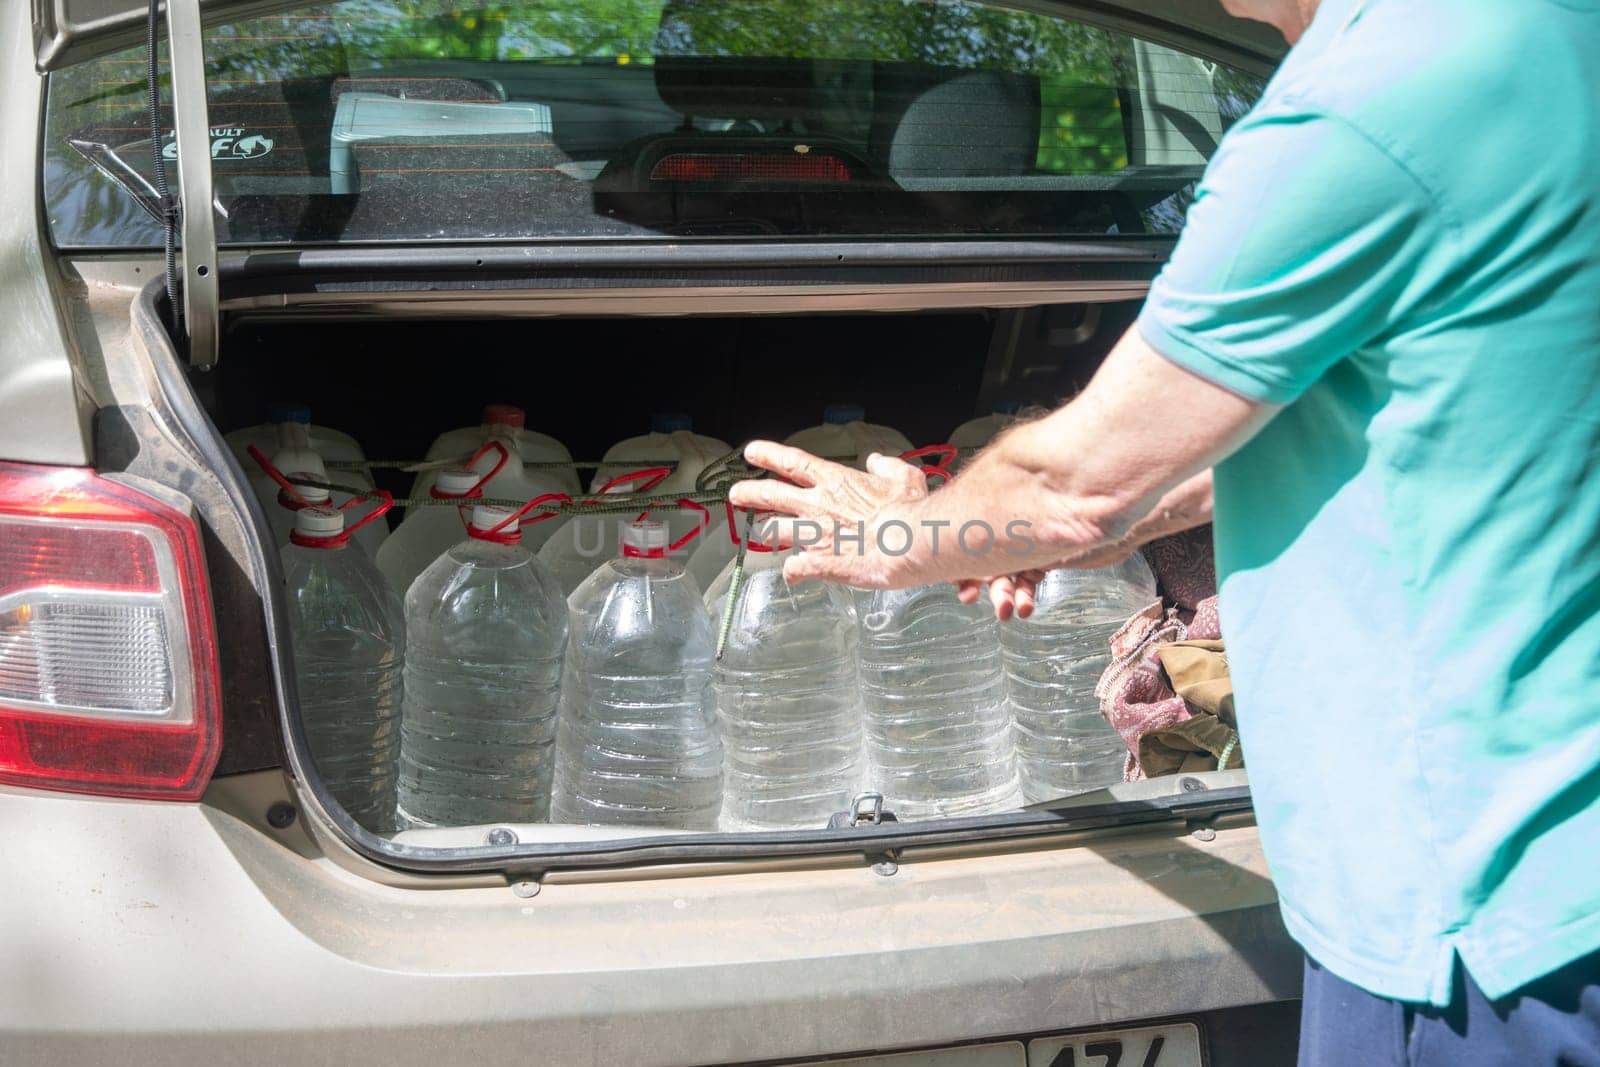 male volunteer loads many five-liter bottles of clean drinking water into the trunk to help victims of a natural disaster. High quality photo